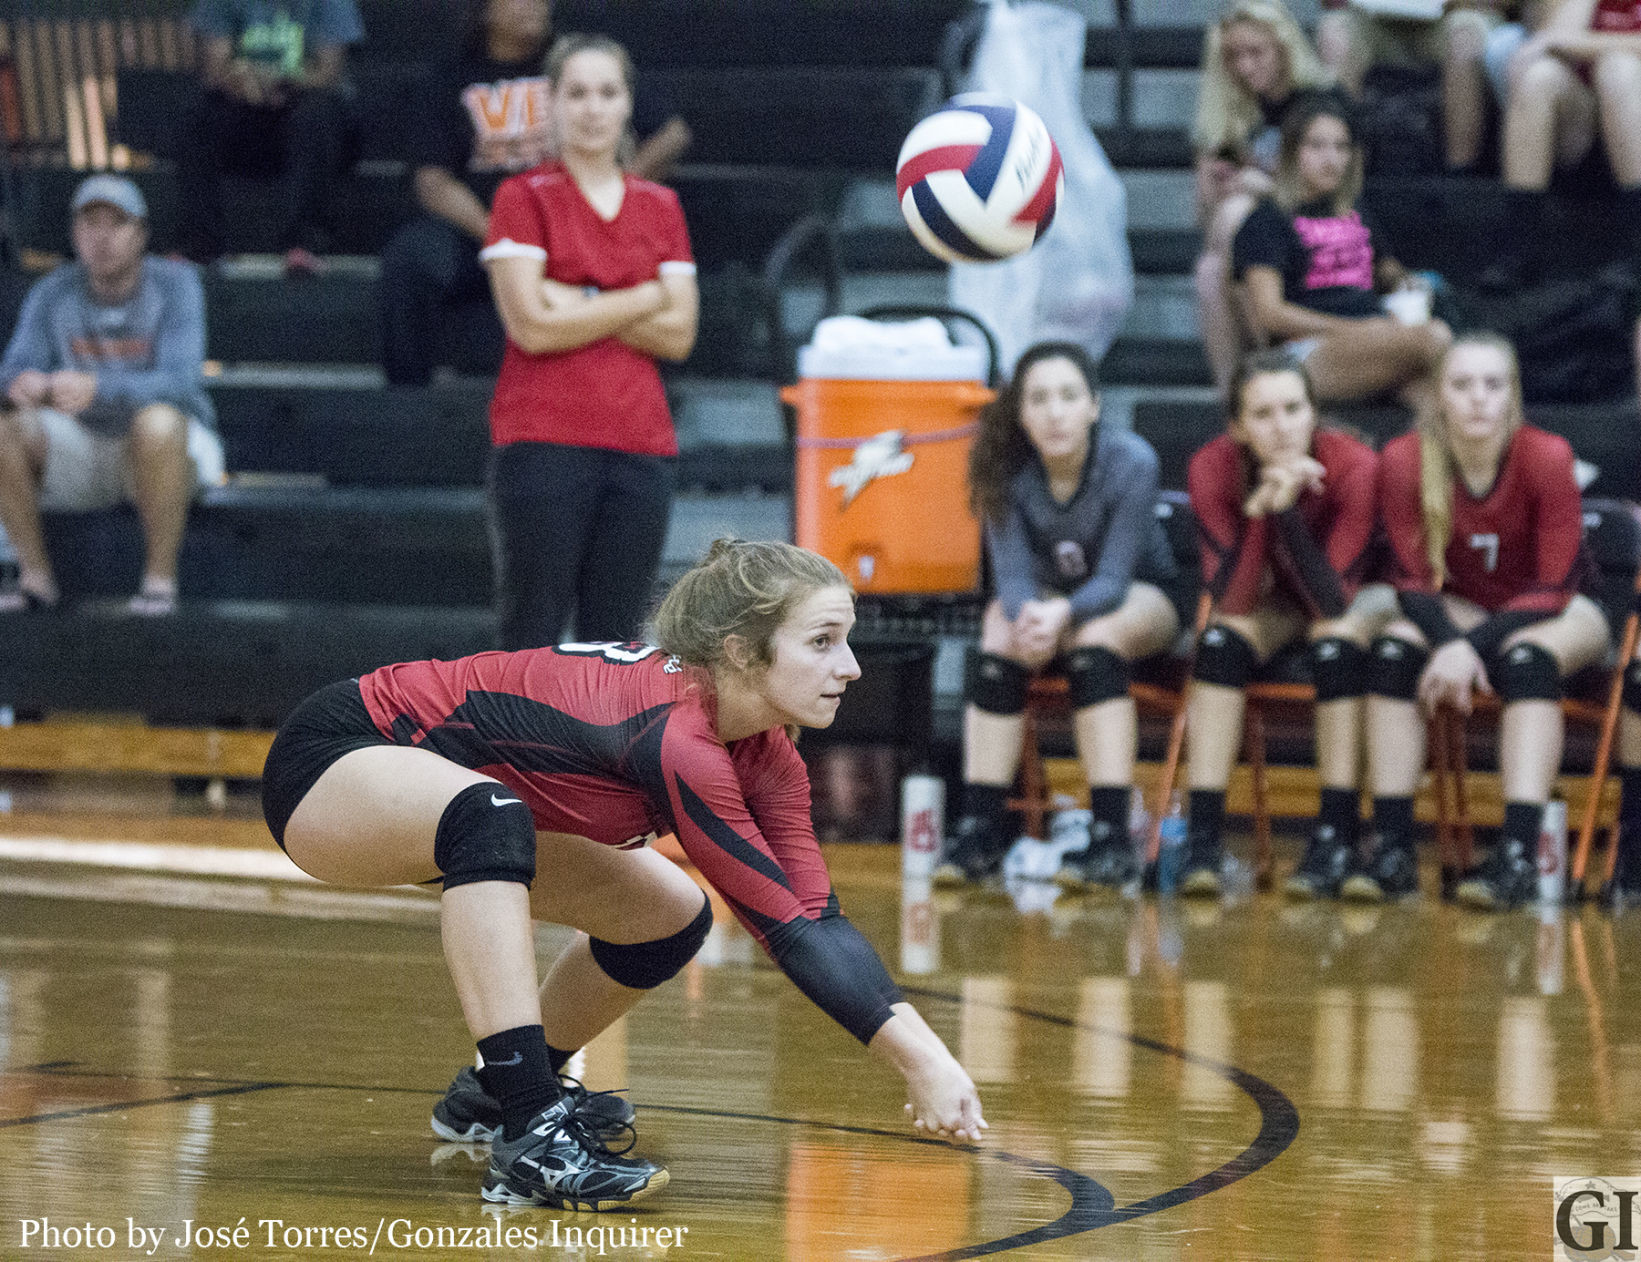 Gracey Novosad (13) gets low to receive a serve in Shiner St. Paul’s three-set win over Gonzales.